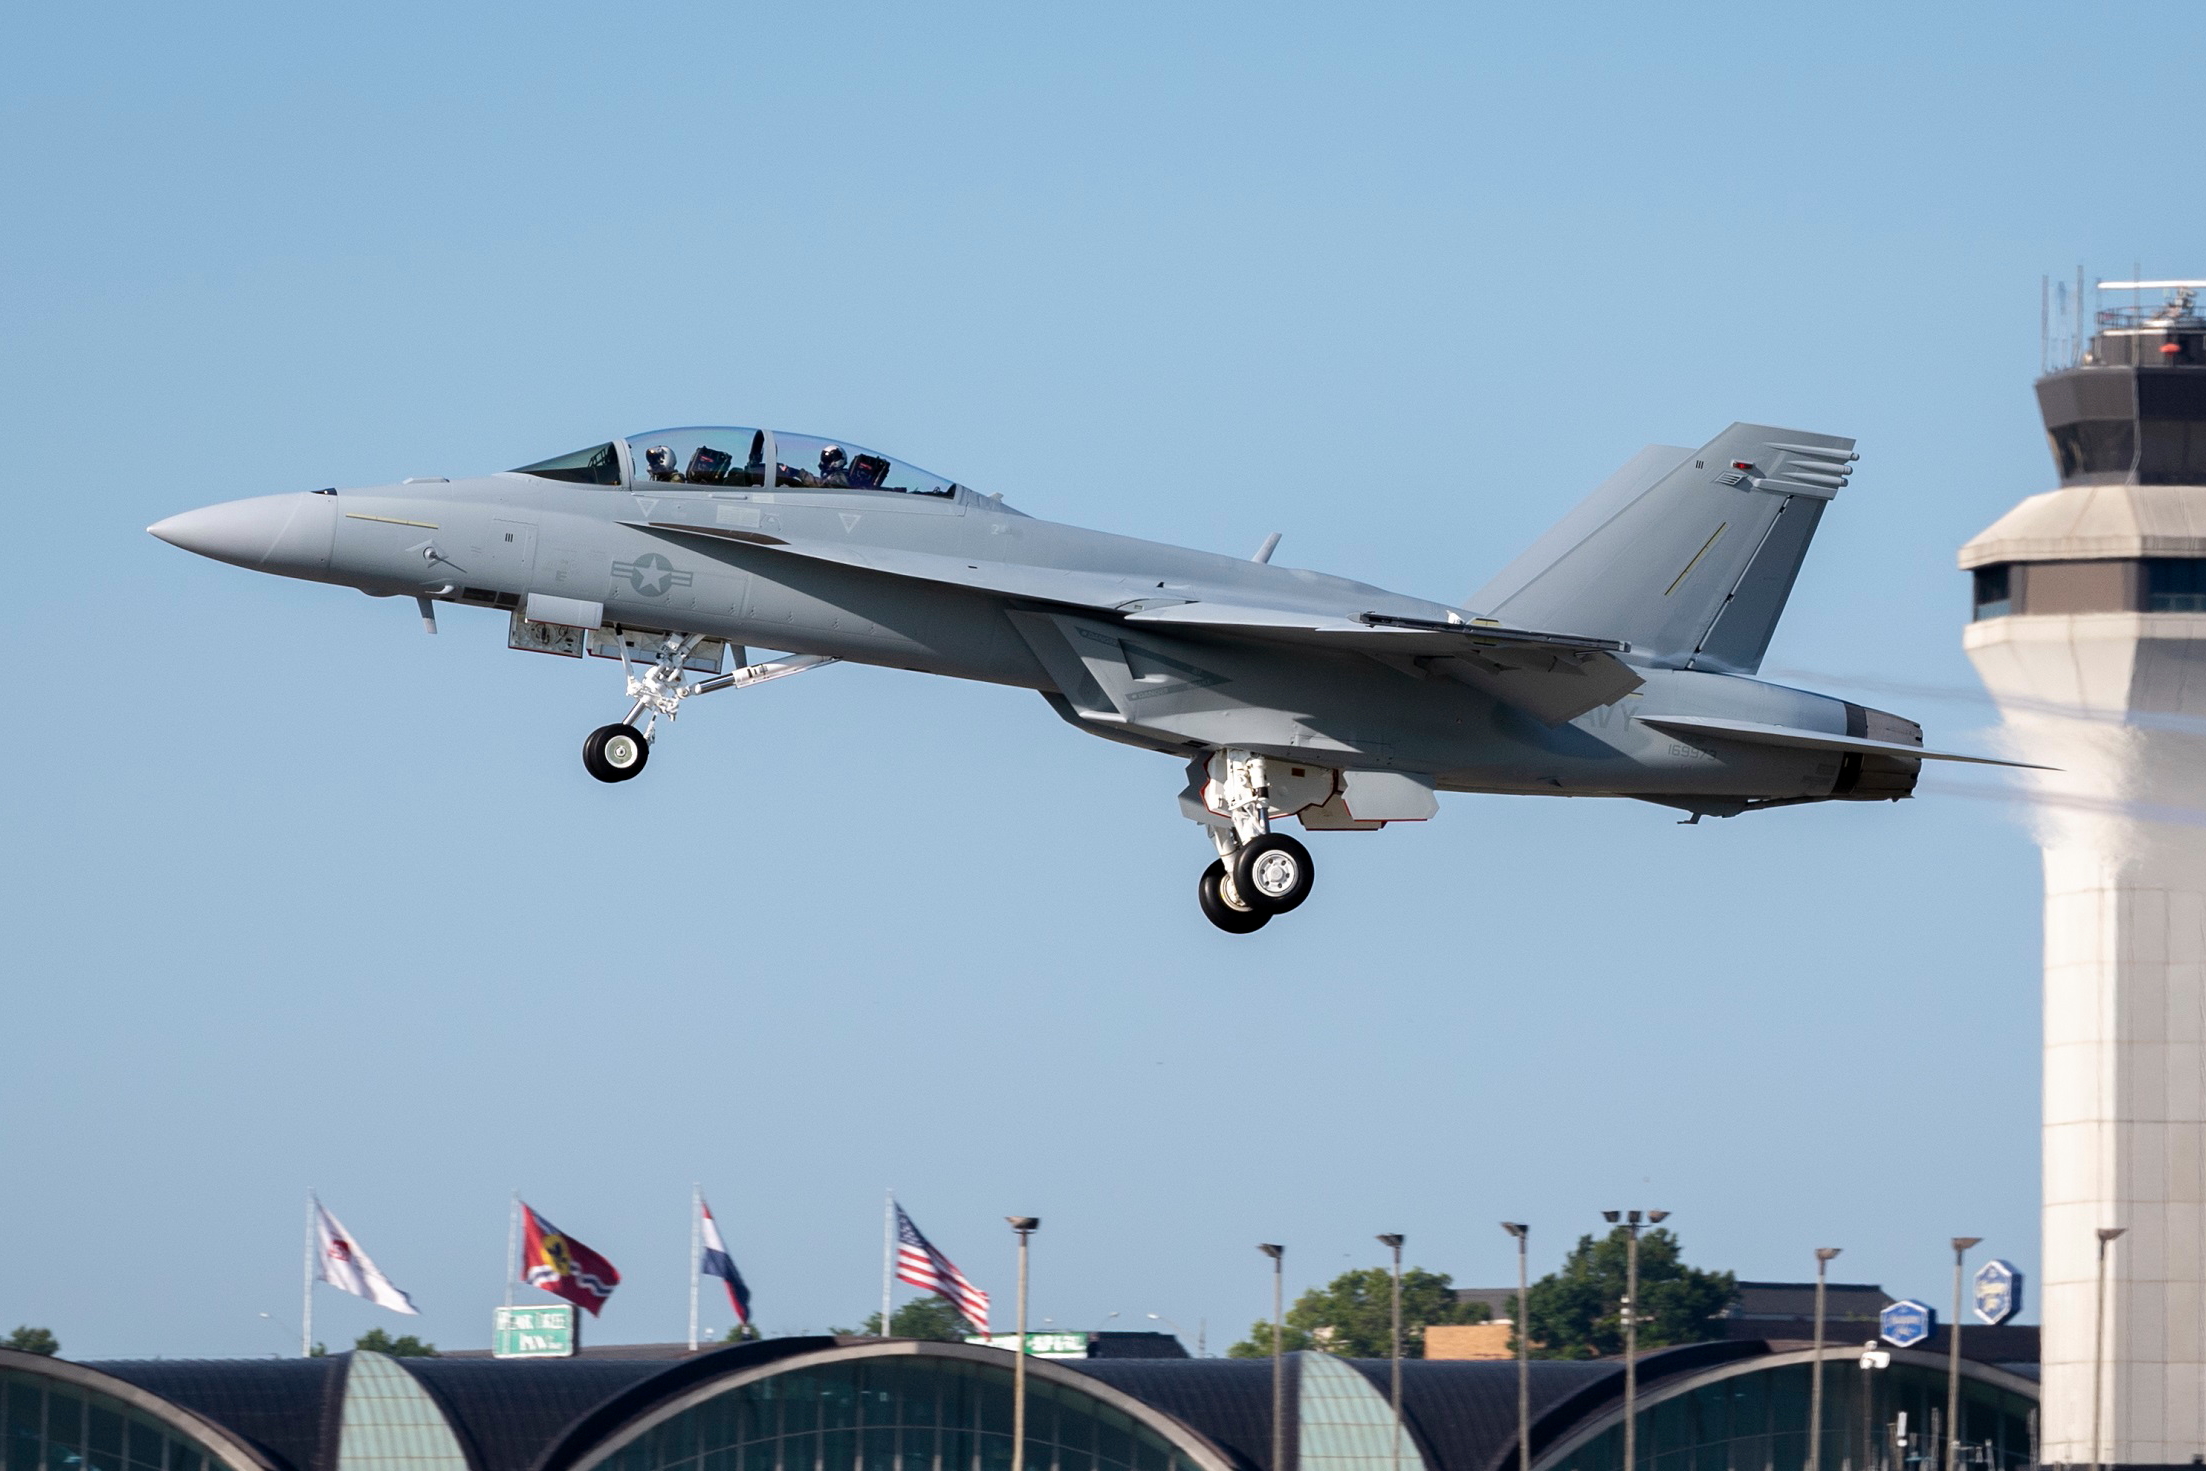 Boeing has delivered the first of 78 contracted Block III F/A-18 Super Hornets to the U.S. Navy. Block III gives the Navy the most networked and survivable F/A-18 built with a technology insertion plan designed to outpace future threats. Click to enlarge.